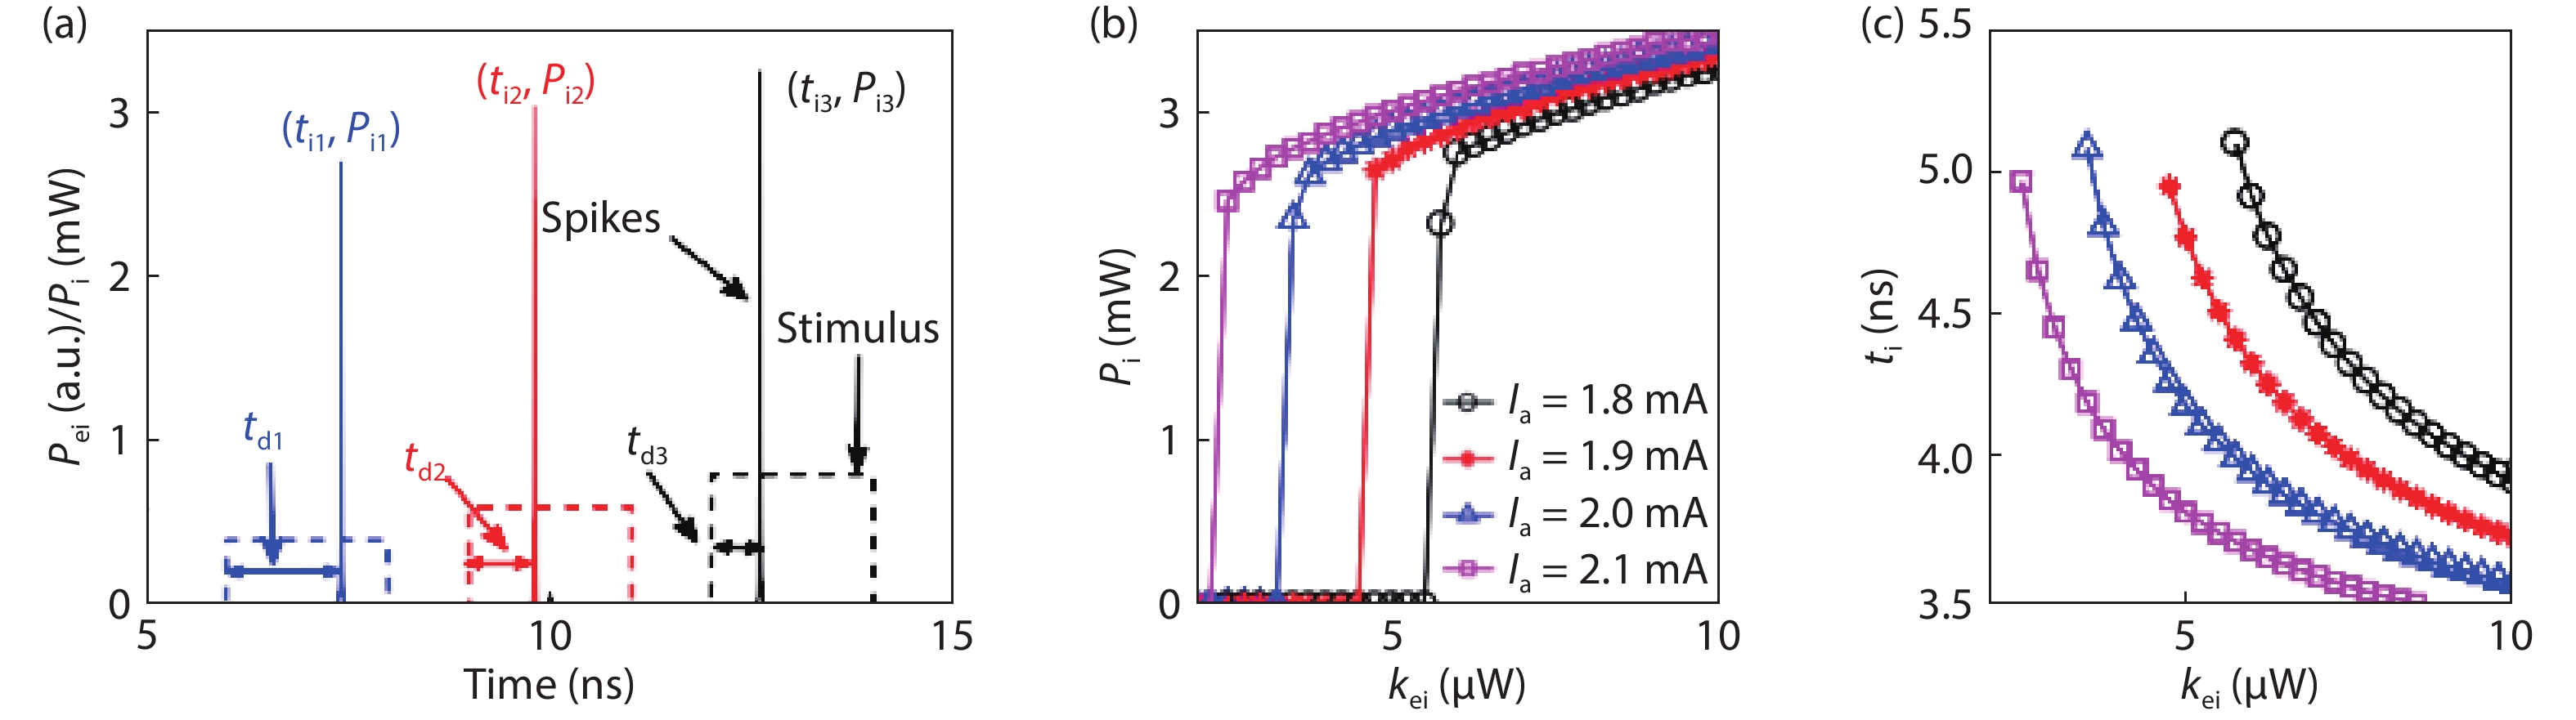 (Color online) (a) Temporal output of the spike encoding based on the modeling-based photonic neuron. (b) Threshold-like response and (c) spike latency property of the modeling-based photonic neuron. © [2020] IEEE. Reprinted with permission from Ref. [39].